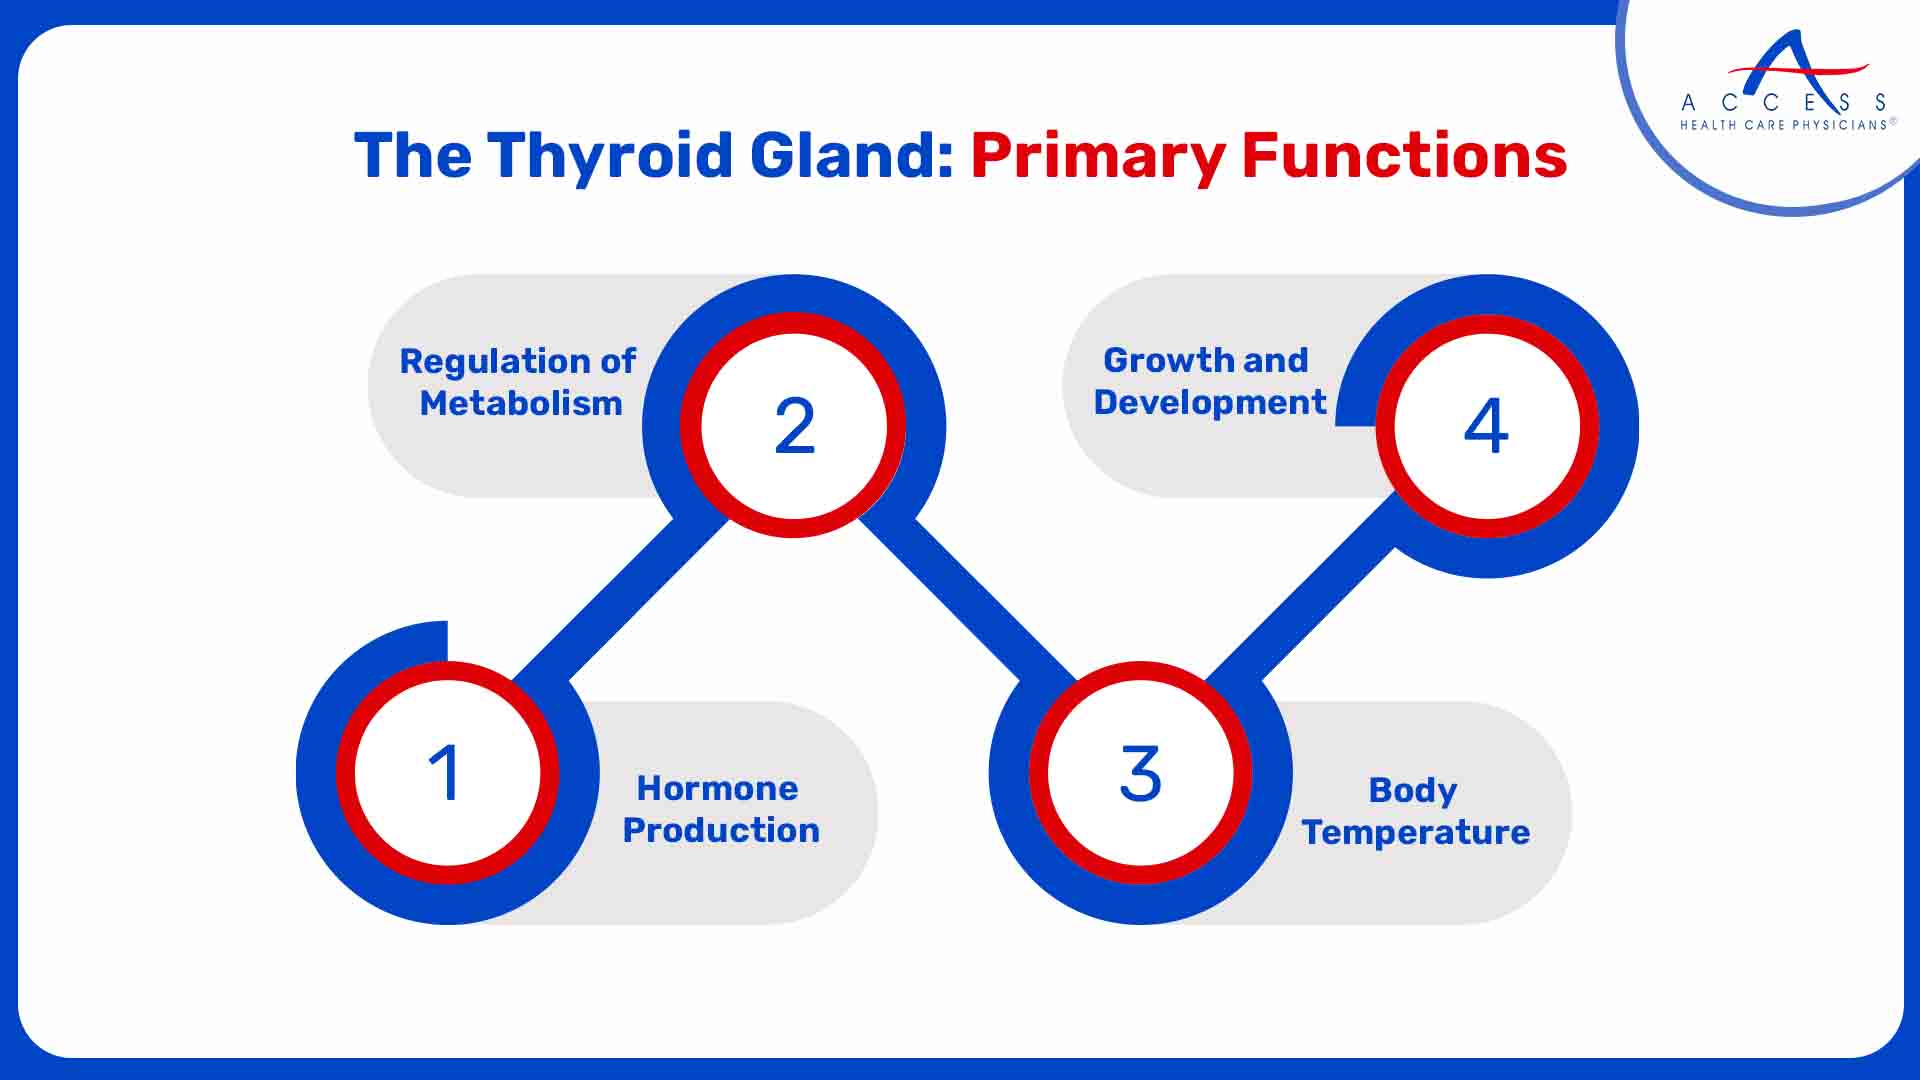 The Thyroid Gland: Primary Functions